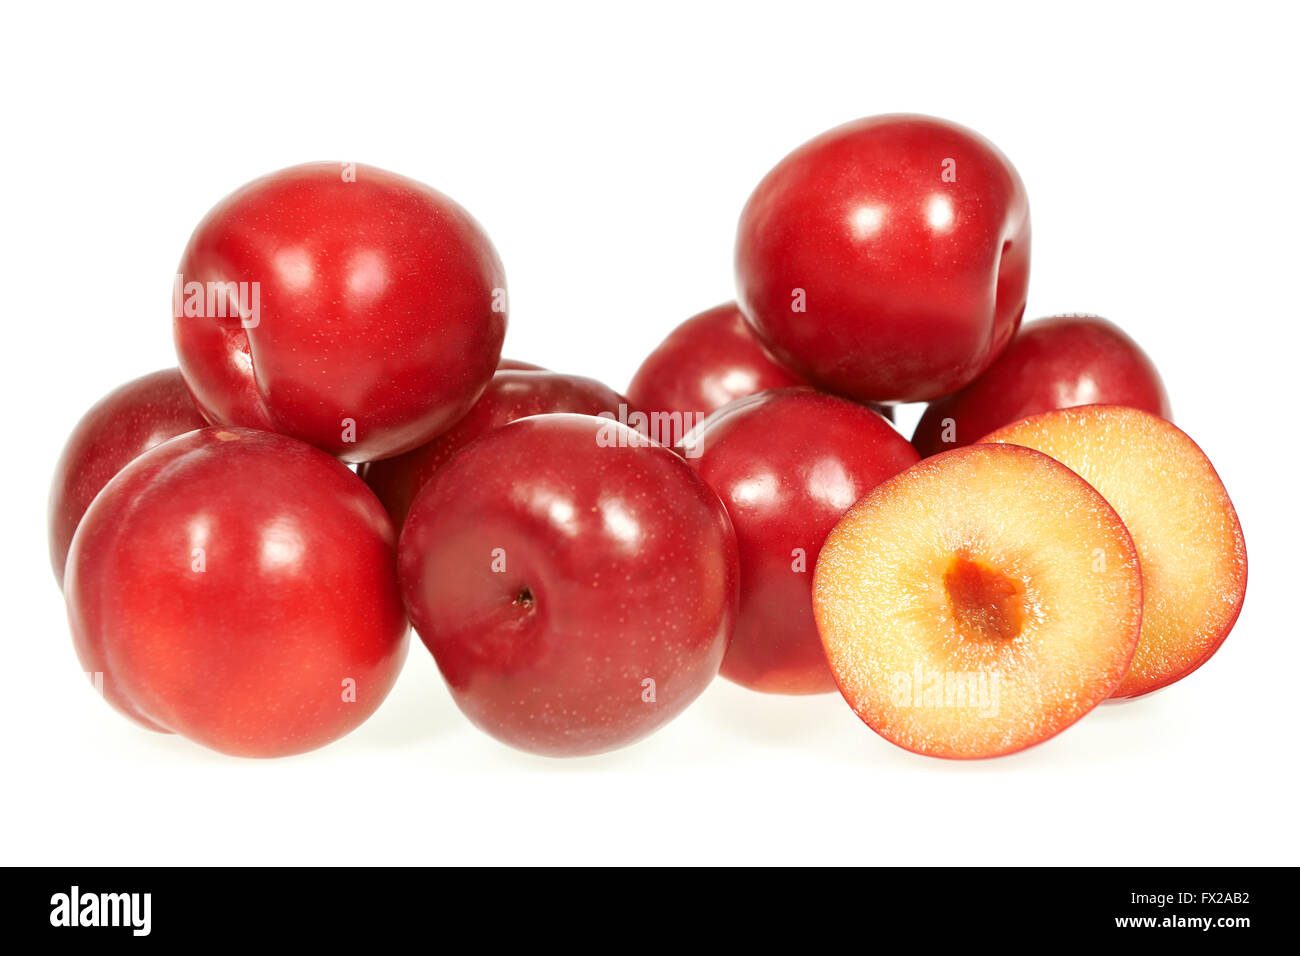 Mature plum fruits isolated on a white background Stock Photo